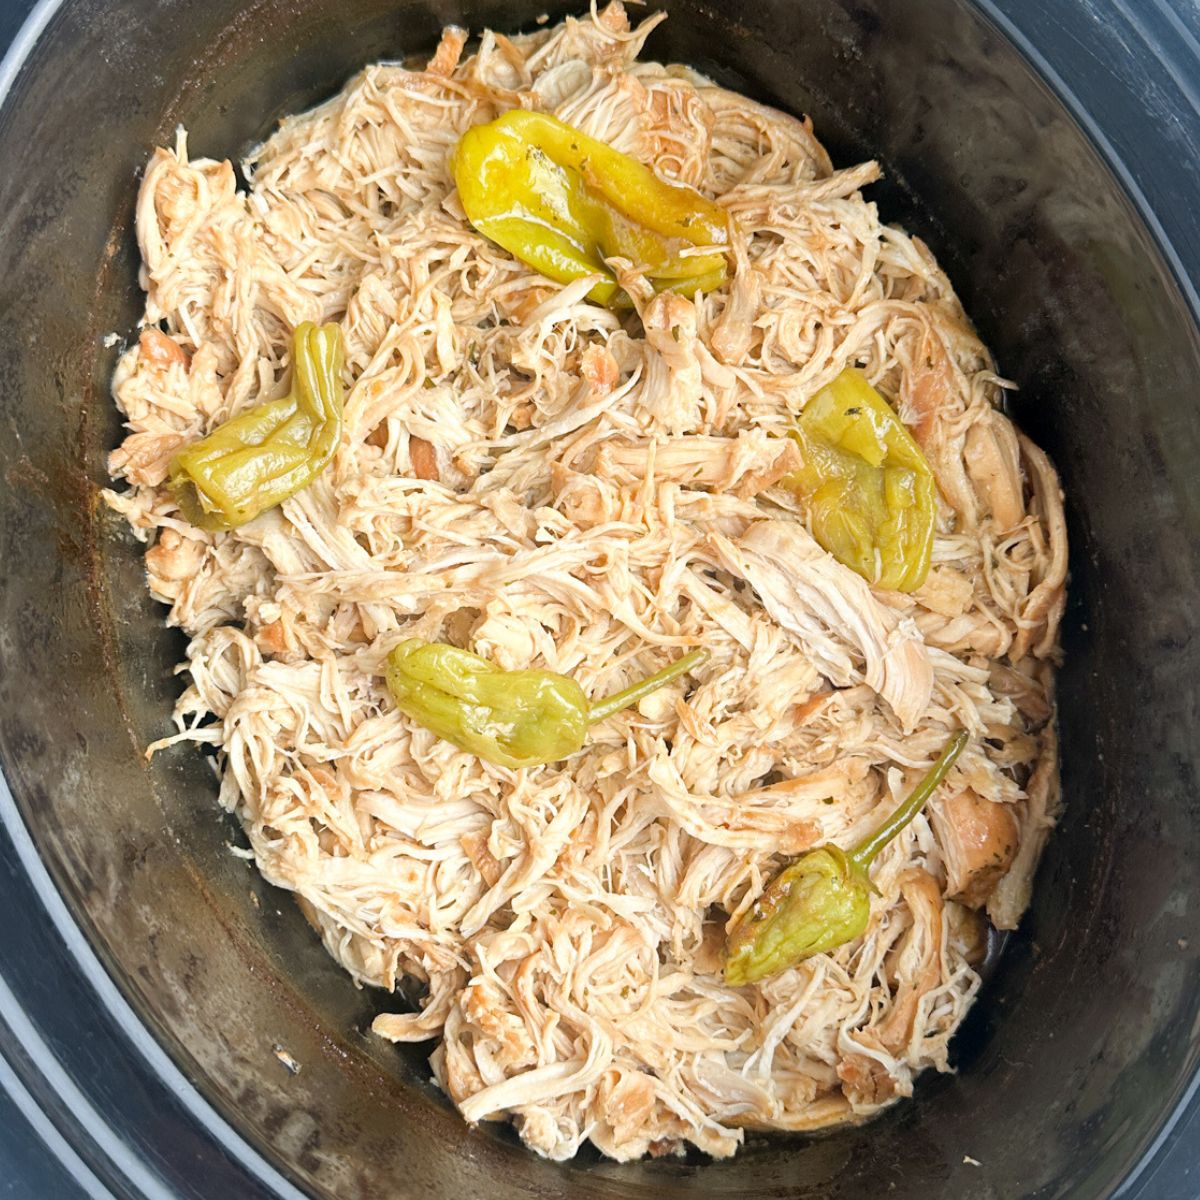 Slow cooker with shredded chicken. 